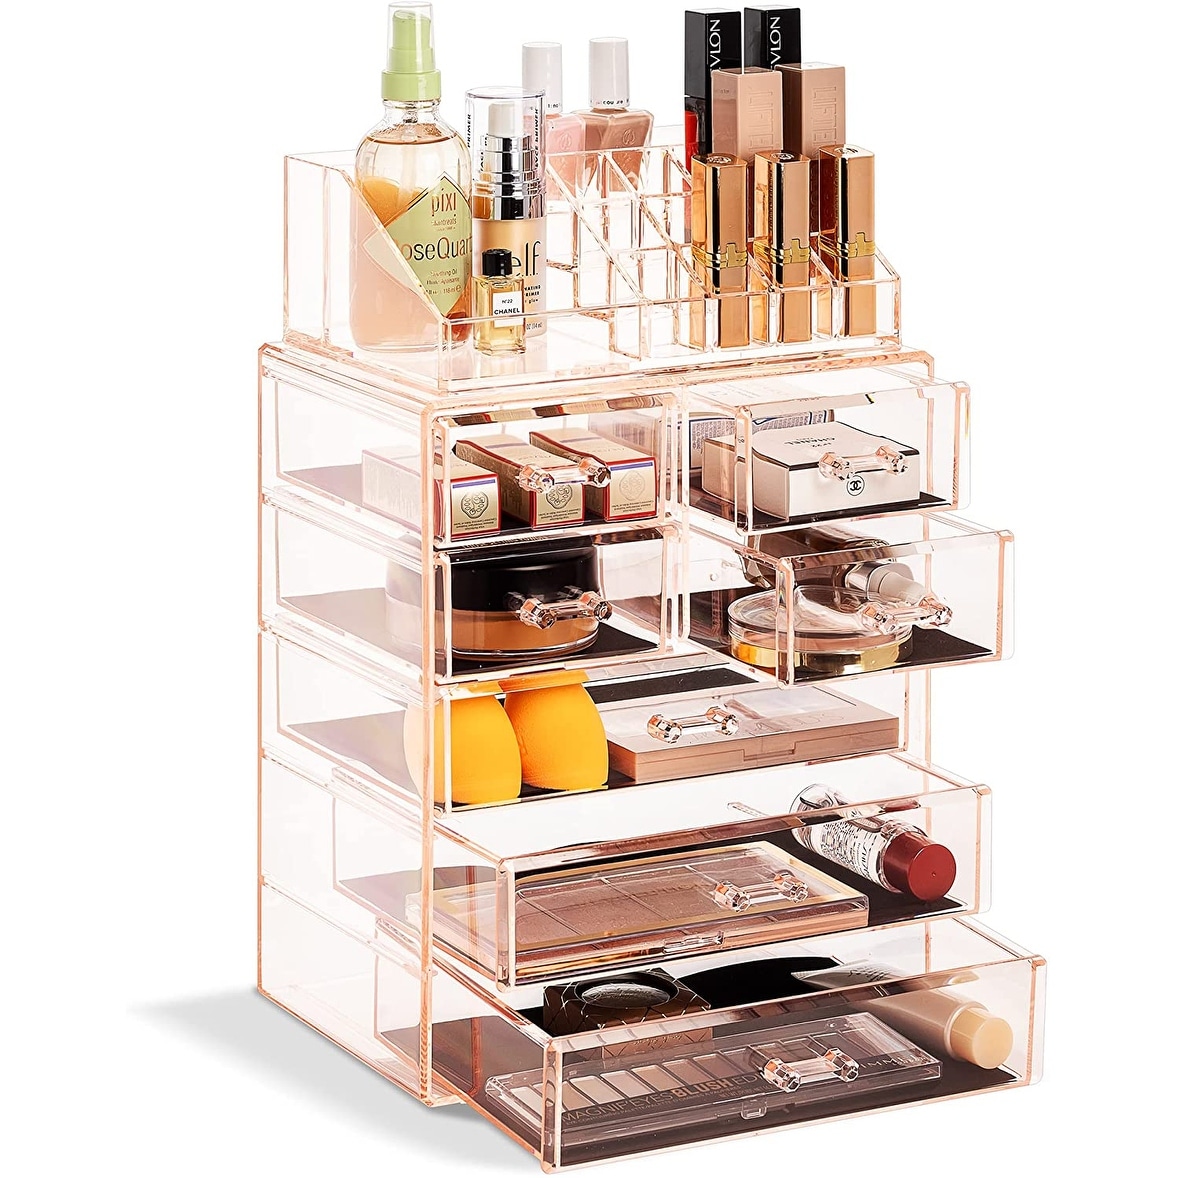 Makeup Organiser Storage Display Box Wooden Makeup Organizer with 4 Drawers  and Built-in Mirror, Sturdy Solid Wood Storage Box for Makeup